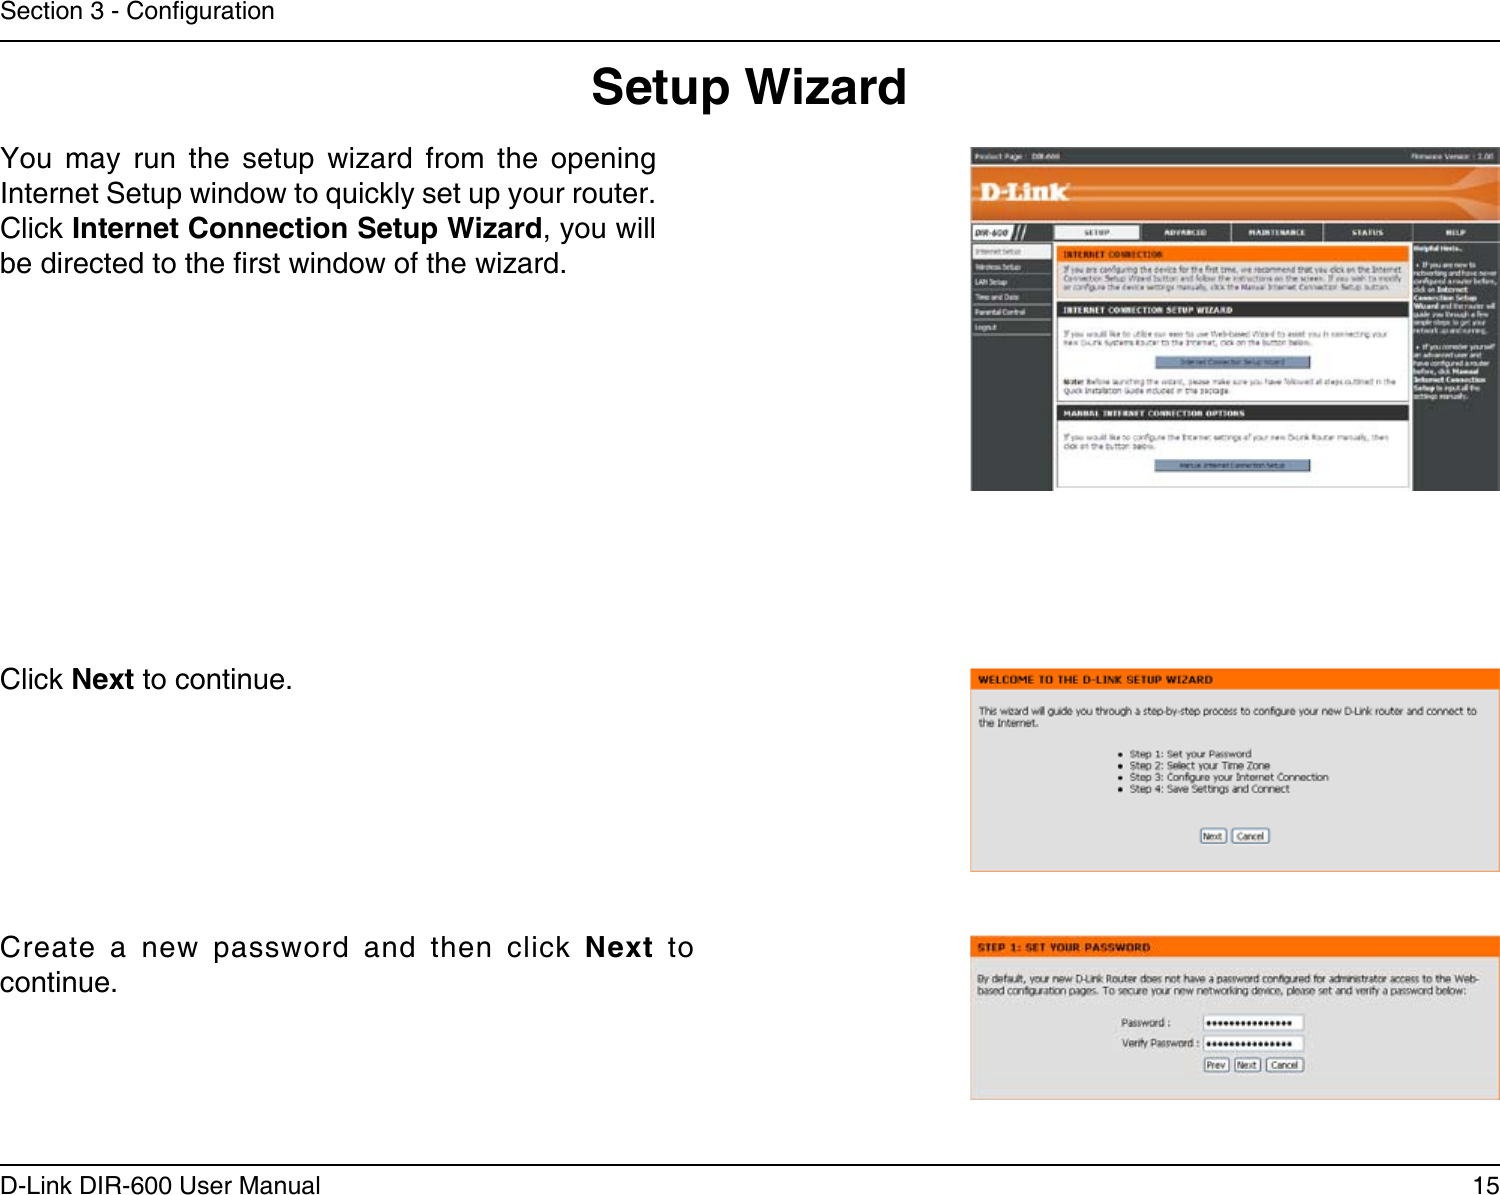 15D-Link DIR-600 User ManualSection 3 - CongurationSetup WizardYou  may  run  the  setup  wizard  from  the  opening Internet Setup window to quickly set up your router. Click Internet Connection Setup Wizard, you will be directed to the rst window of the wizard.Click Next to continue.Create  a  new  password  and  then  click  Next  to continue.